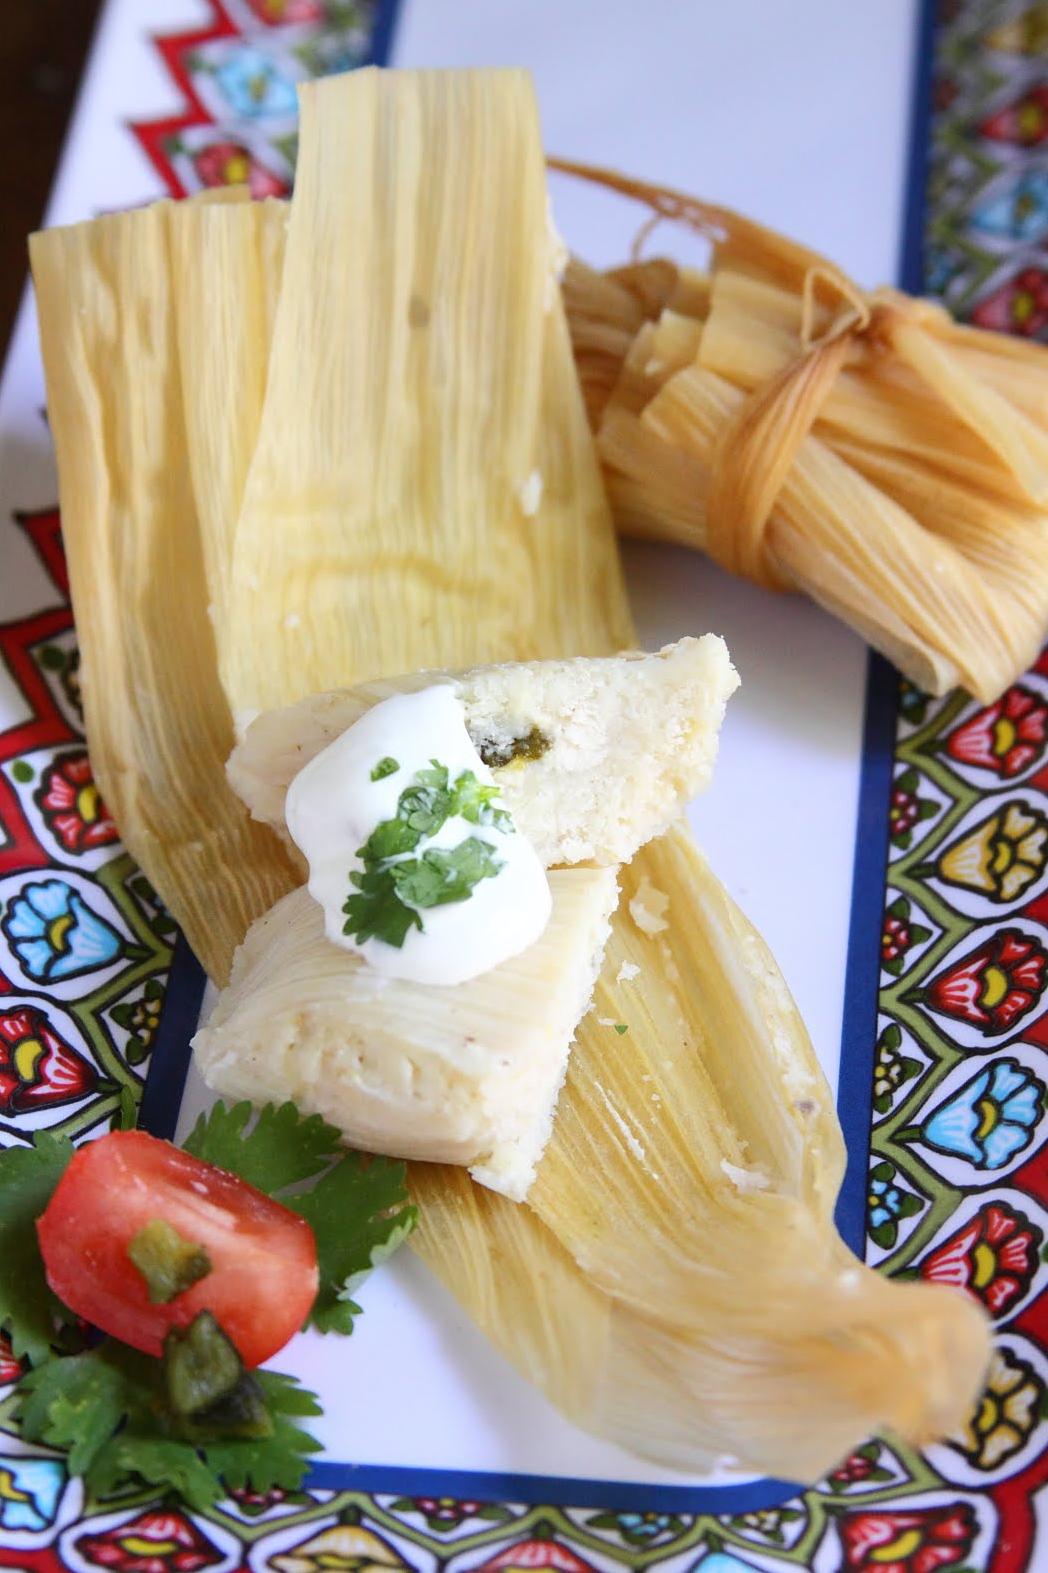  Perfectly wrapped Tamales, ready to be devoured!